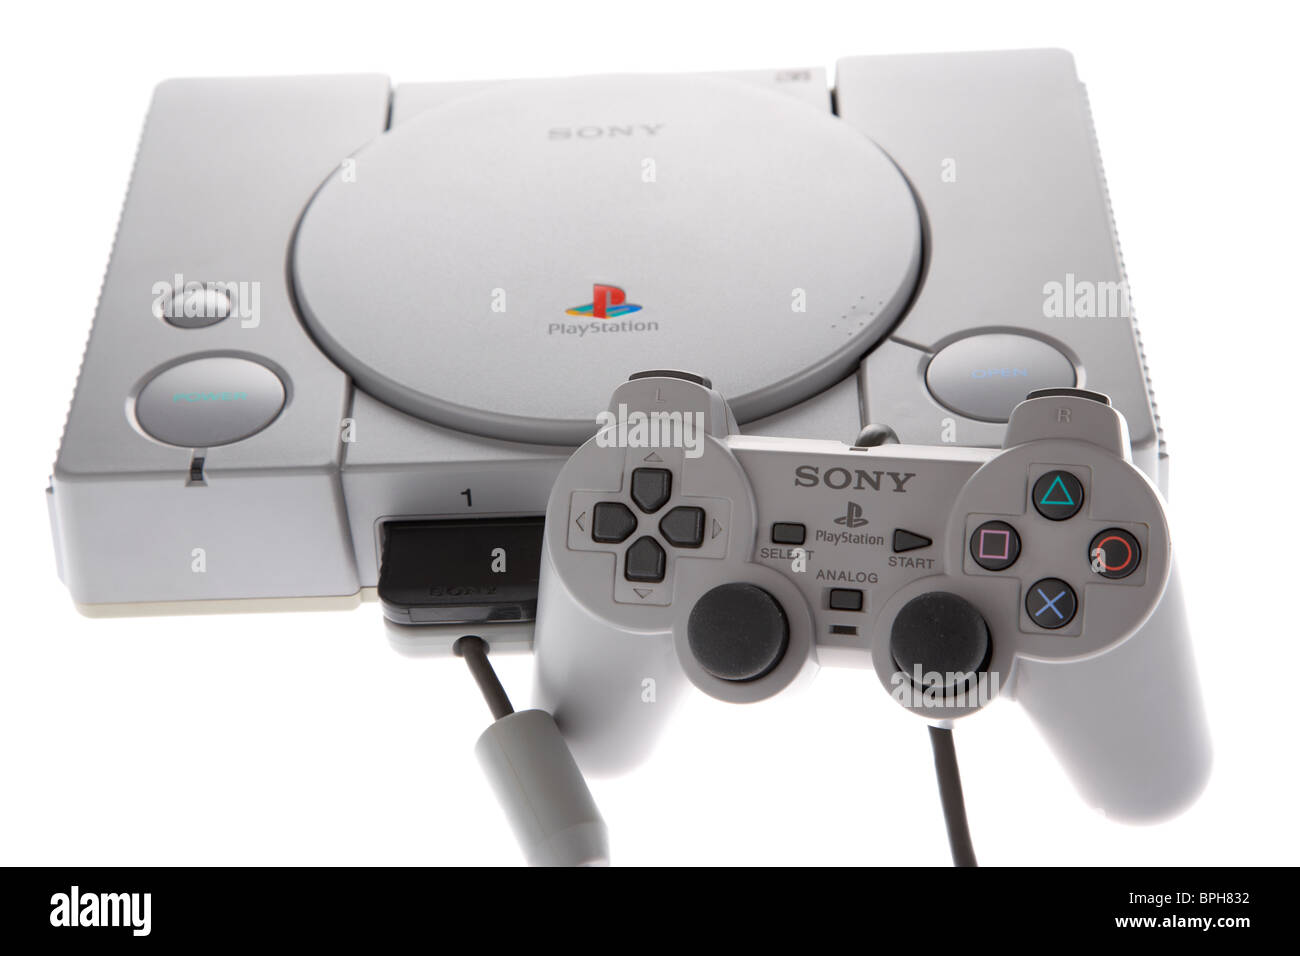 stewardesse Ejeren brydning original playstation psone console and dual shock controller from the 90s  retro gaming old historic games machine Stock Photo - Alamy